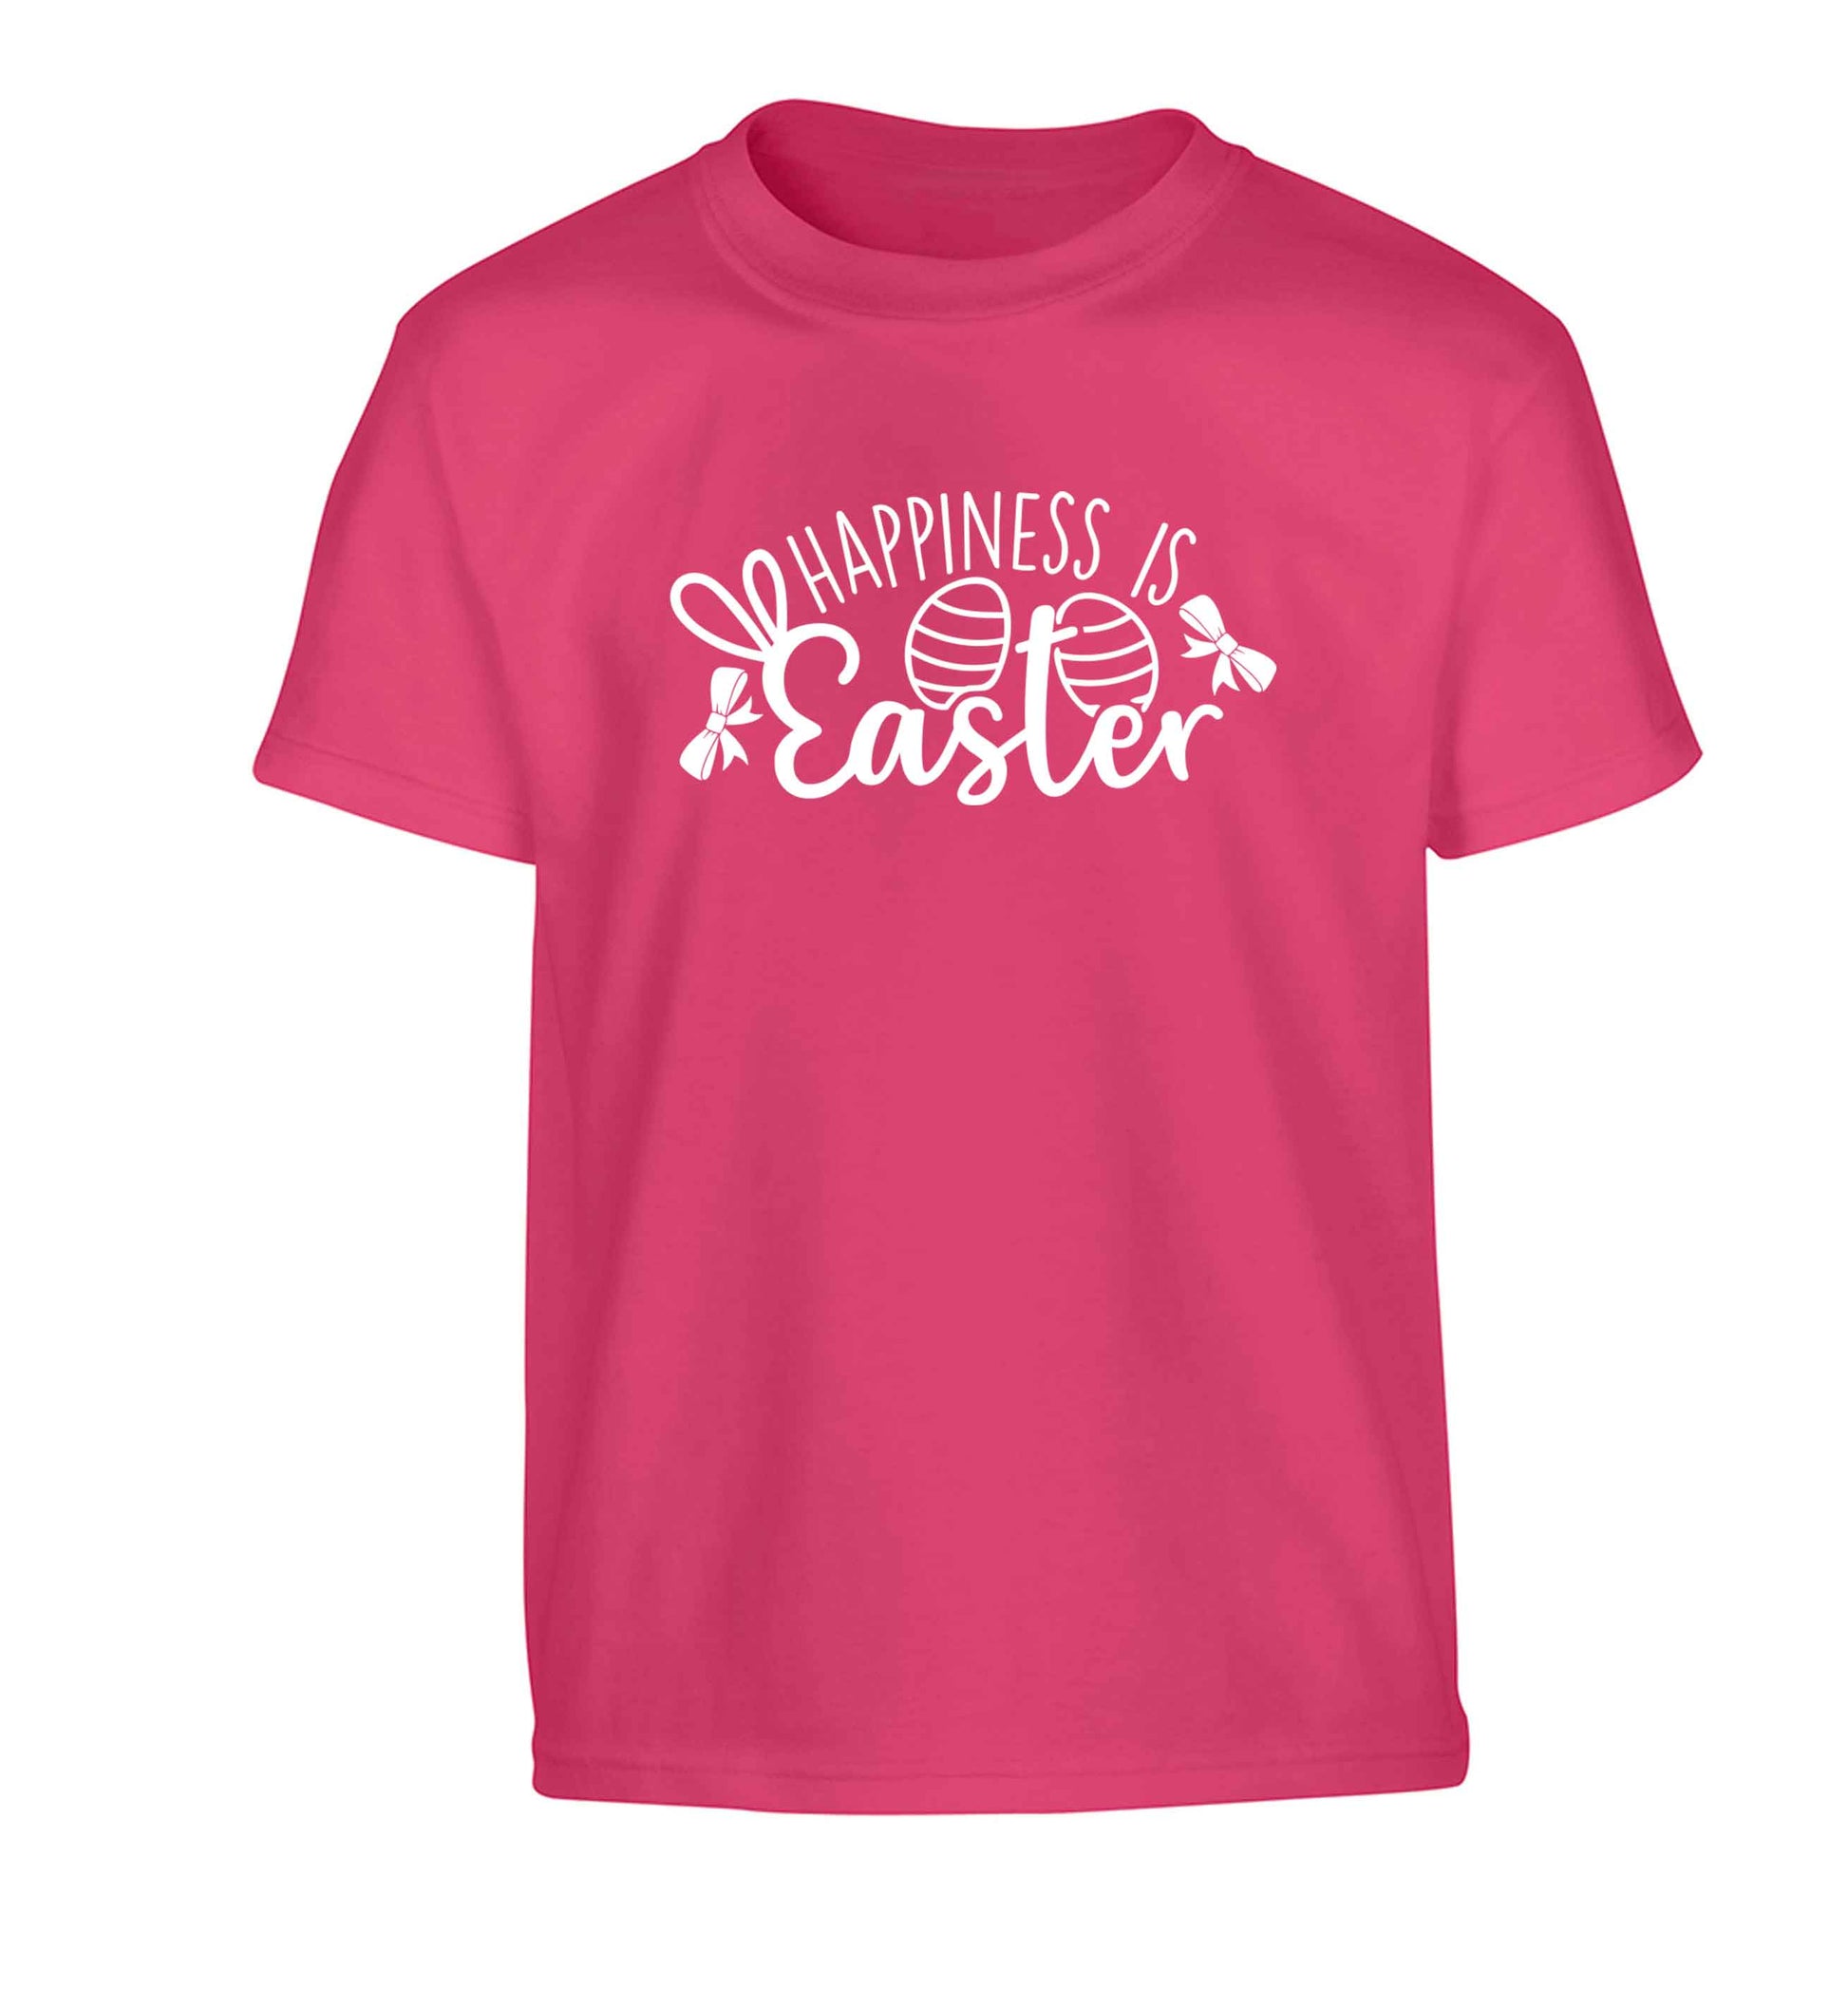 Happiness is easter Children's pink Tshirt 12-13 Years